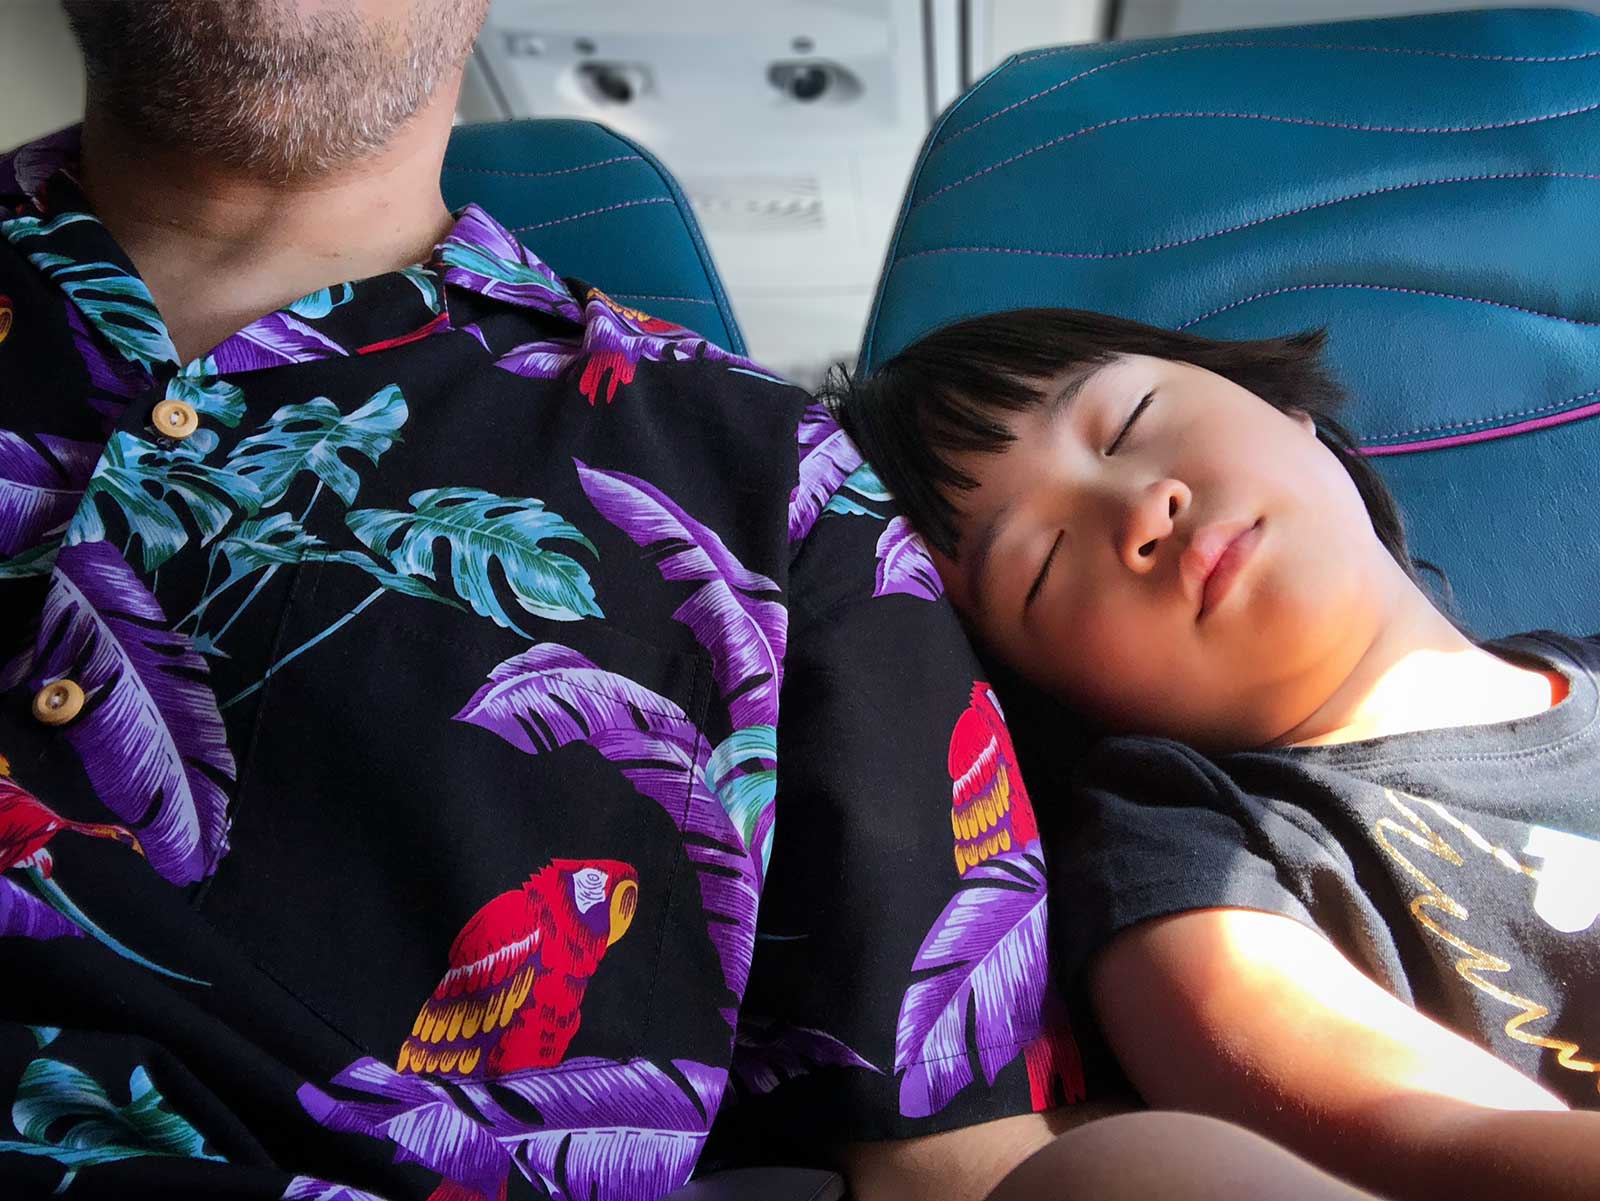 Sleeping in the plane after a trip to Hawaii